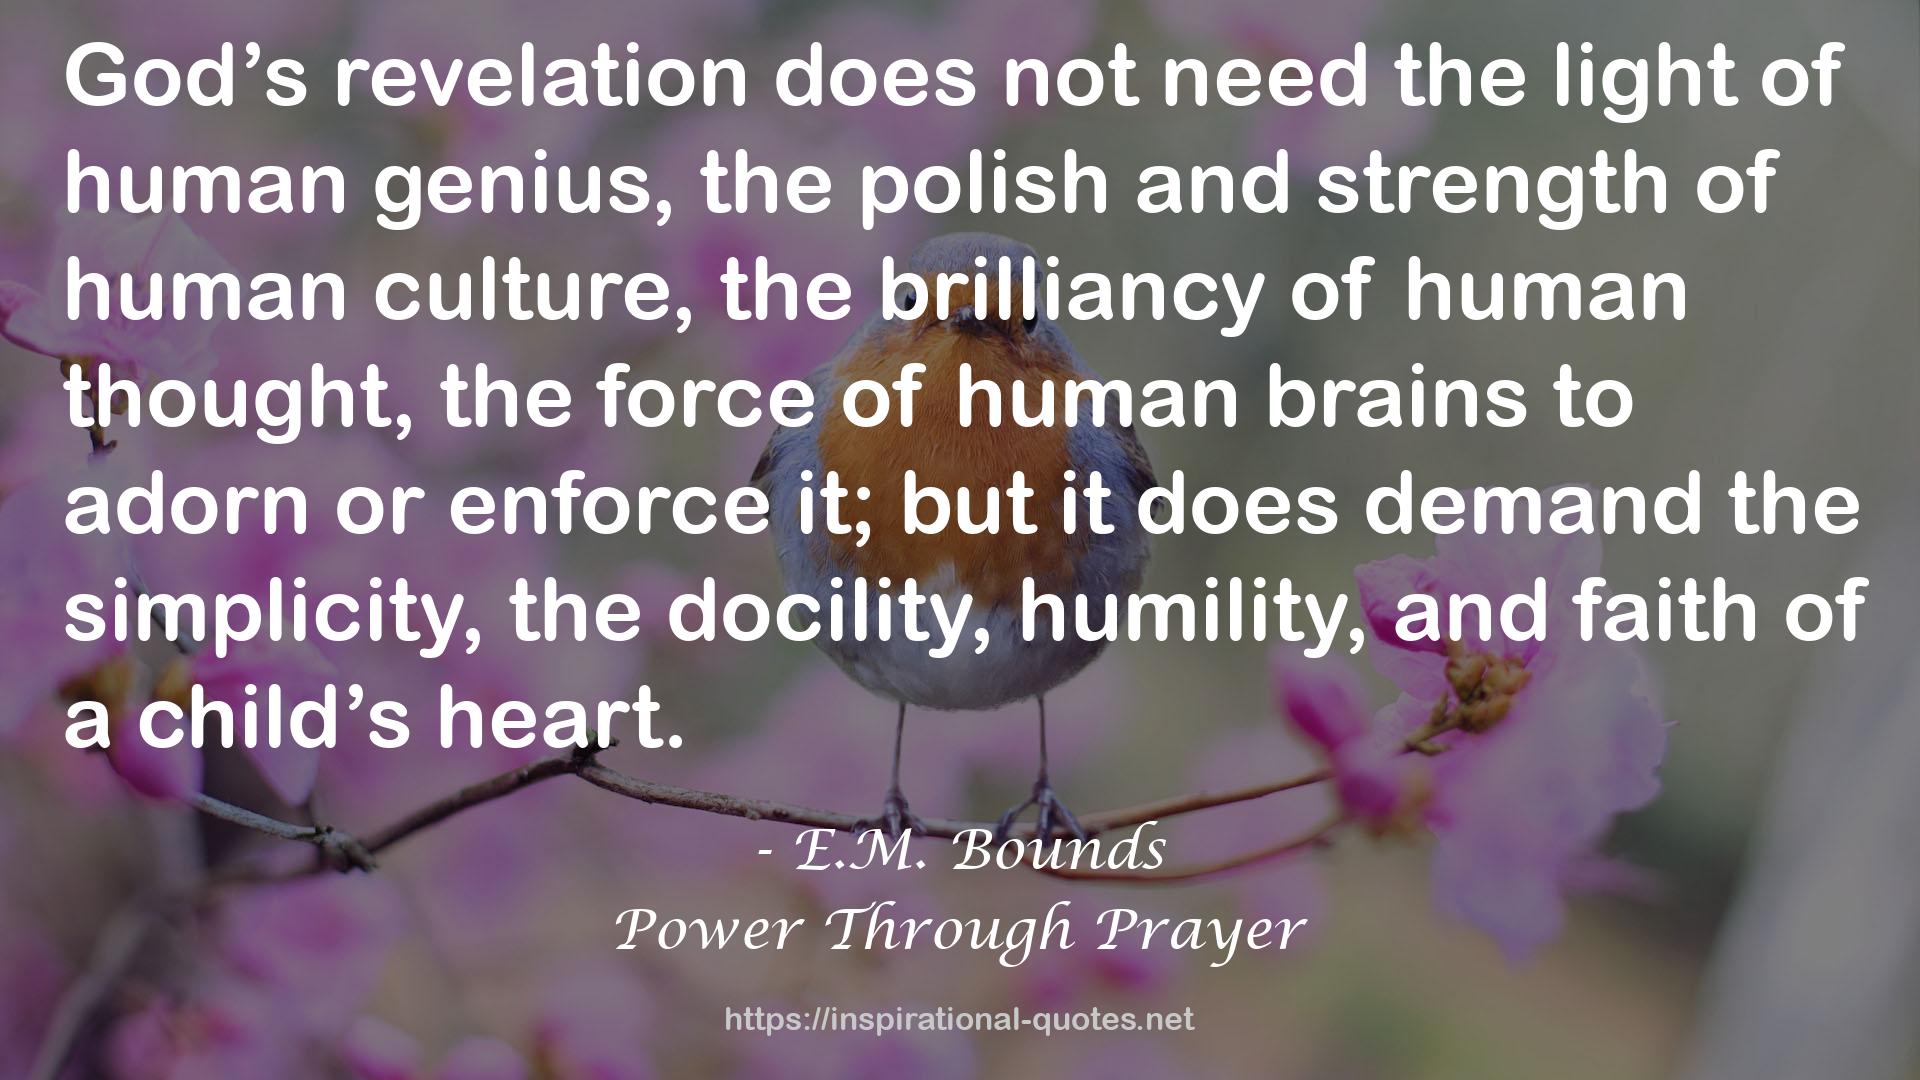 E.M. Bounds QUOTES